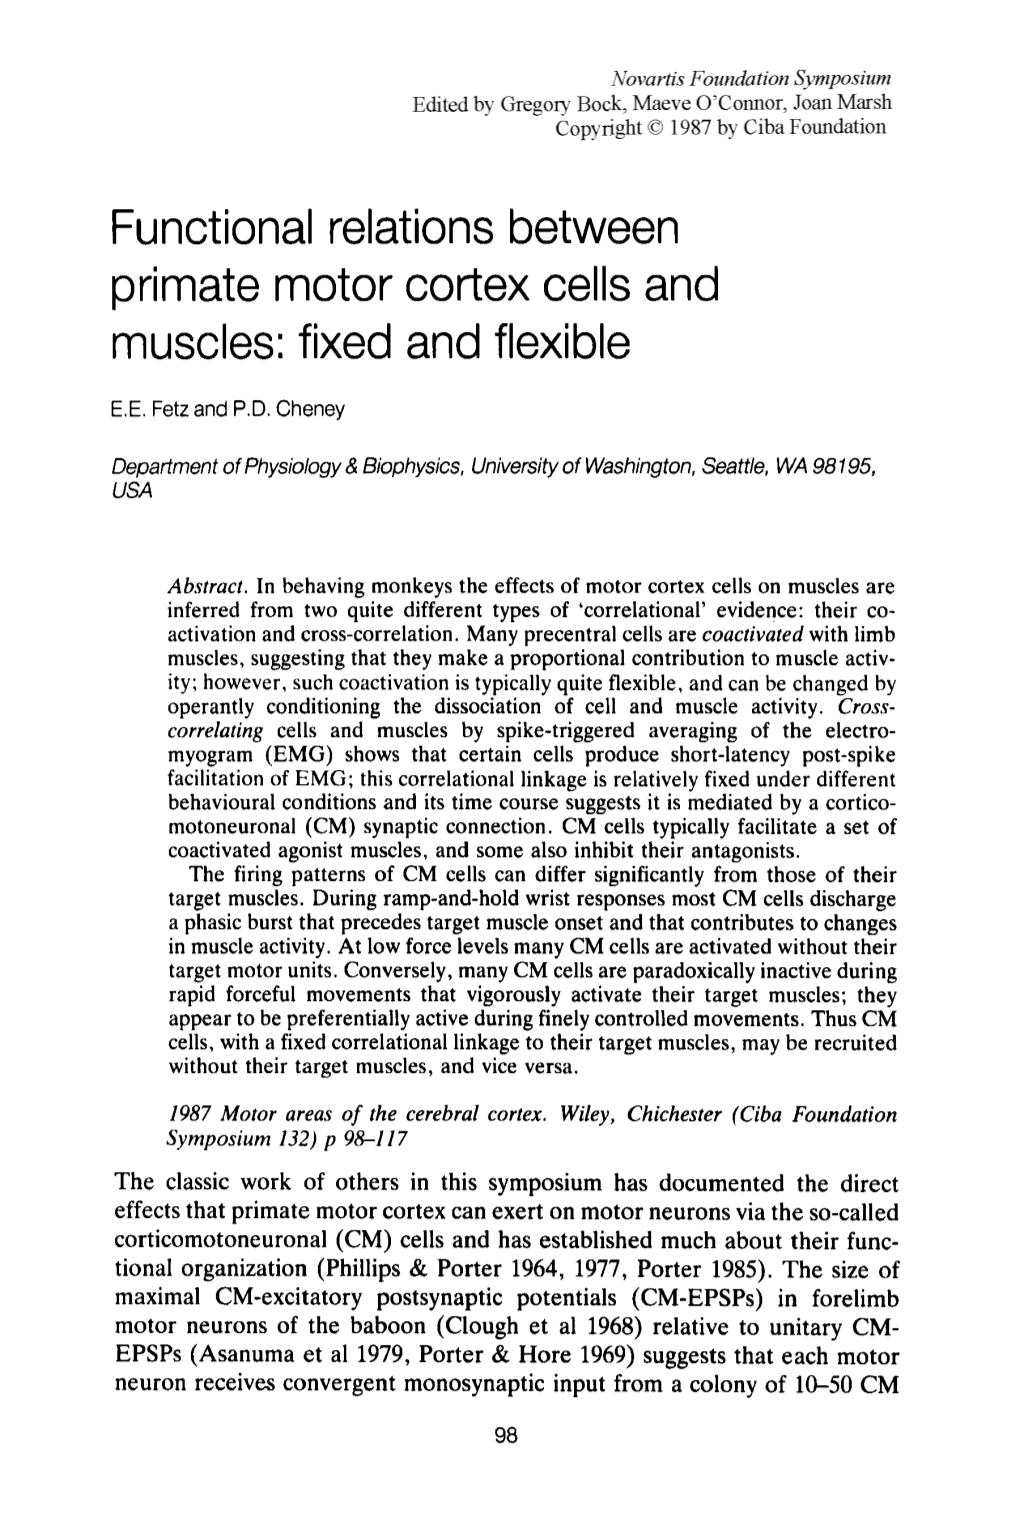 Functional Relations Between Primate Motor Cortex Cells and Muscles: Fixed and Flexible